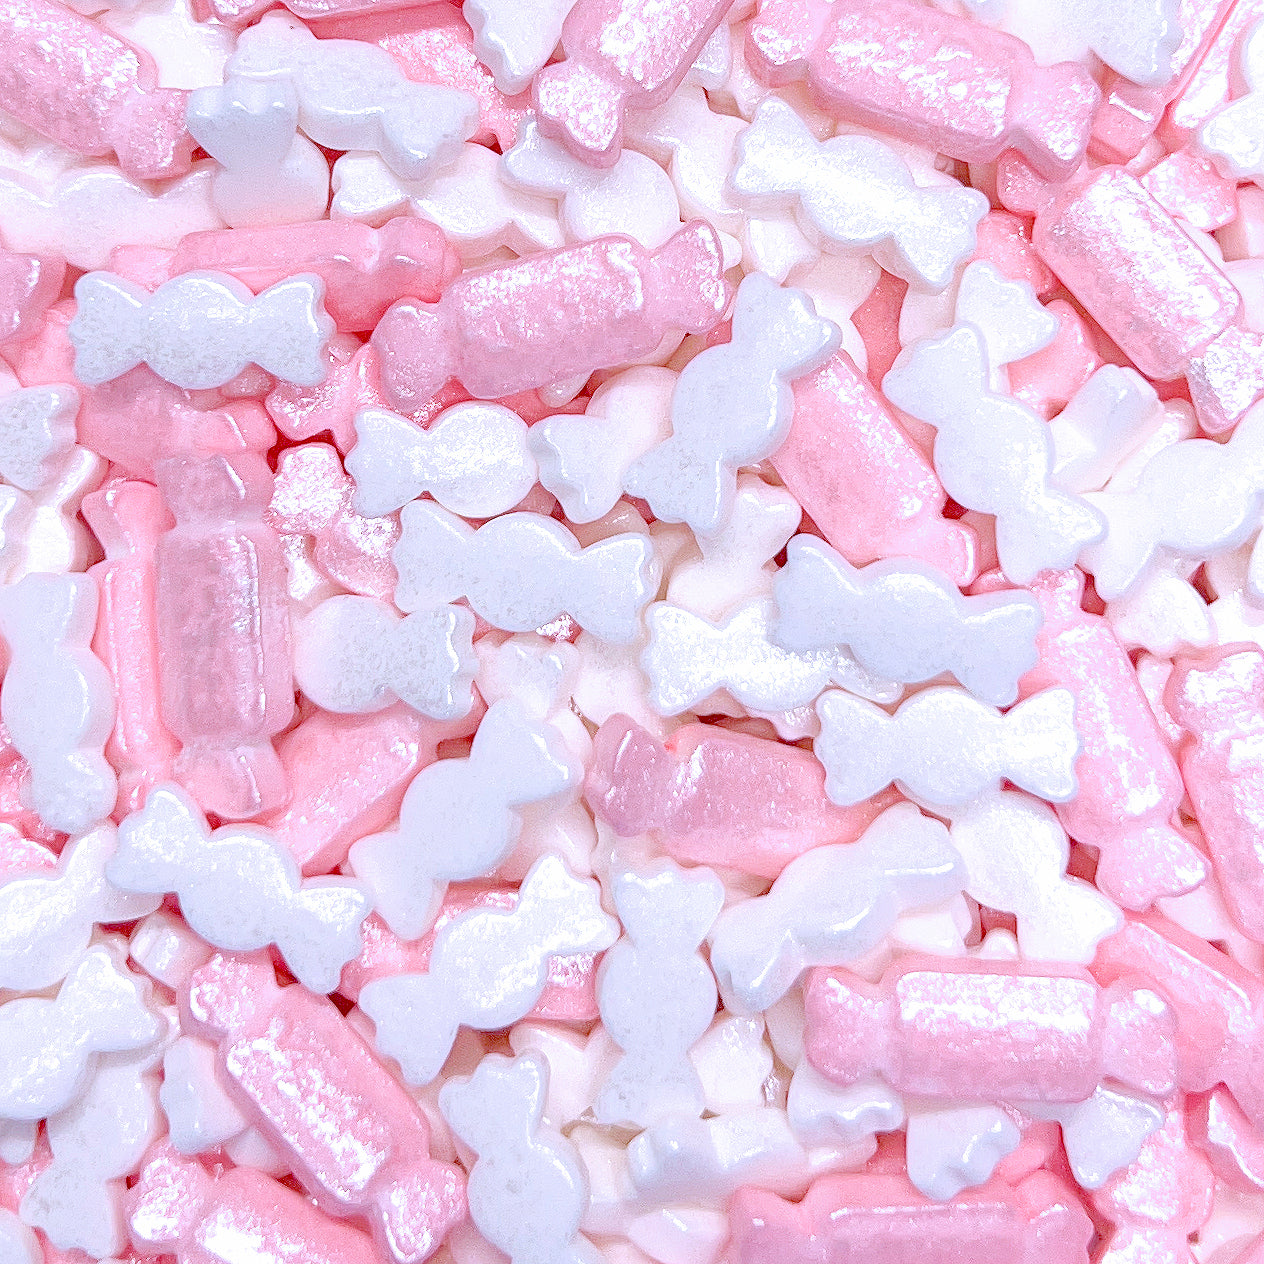 Pink & White Candy Sprinkles: Wrapped Candy Shape | www.sprinklebeesweet.com